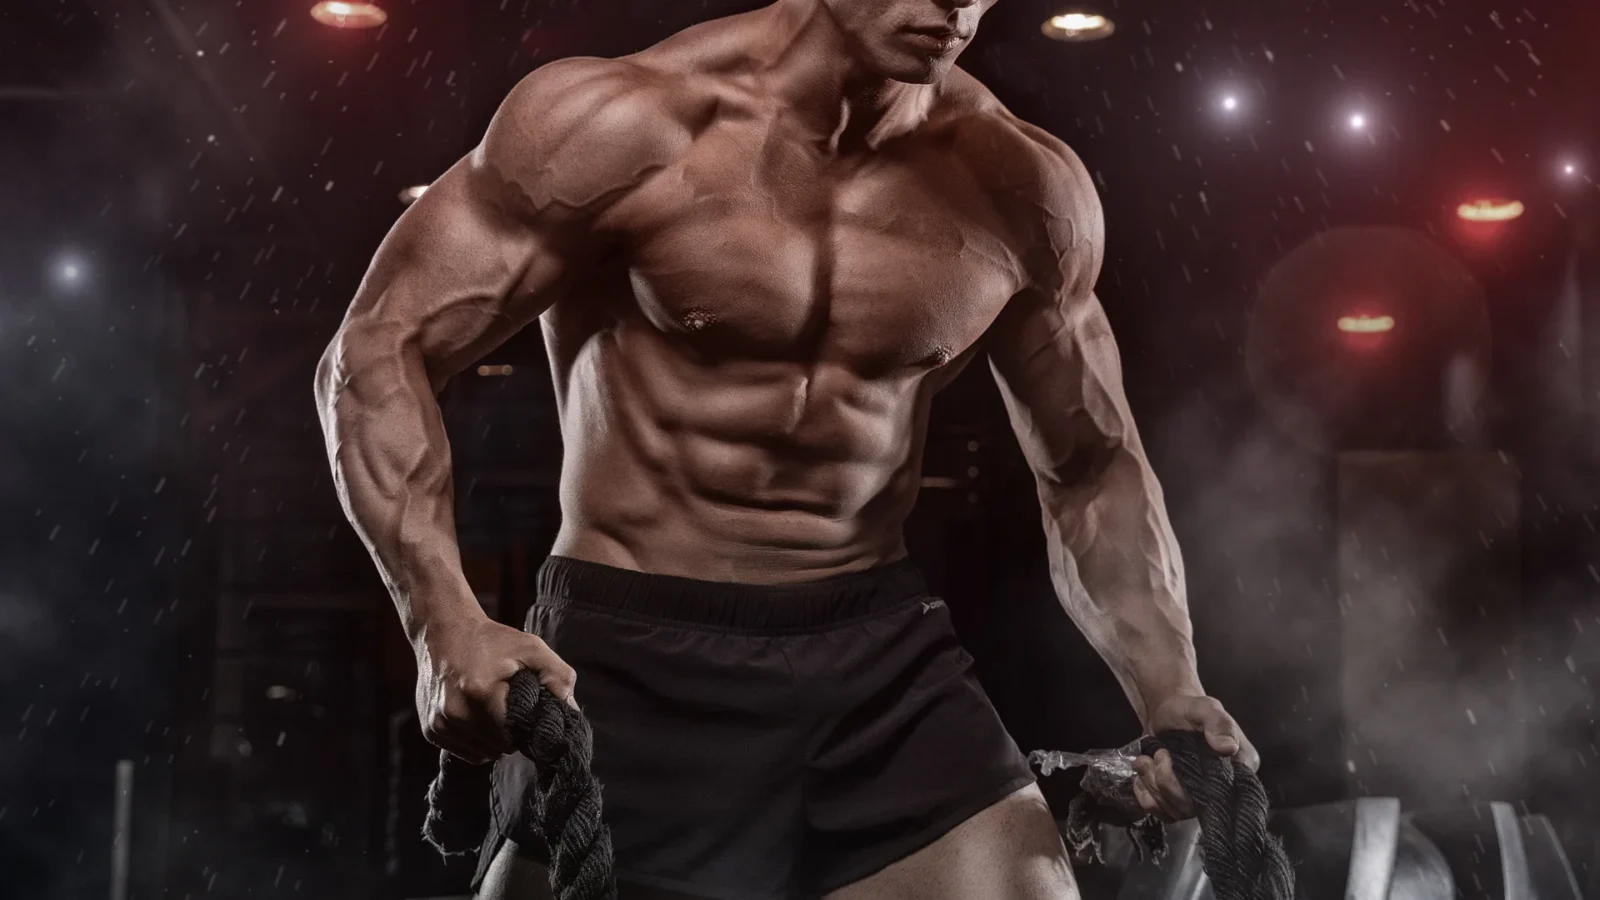 What are anabolic steroids?